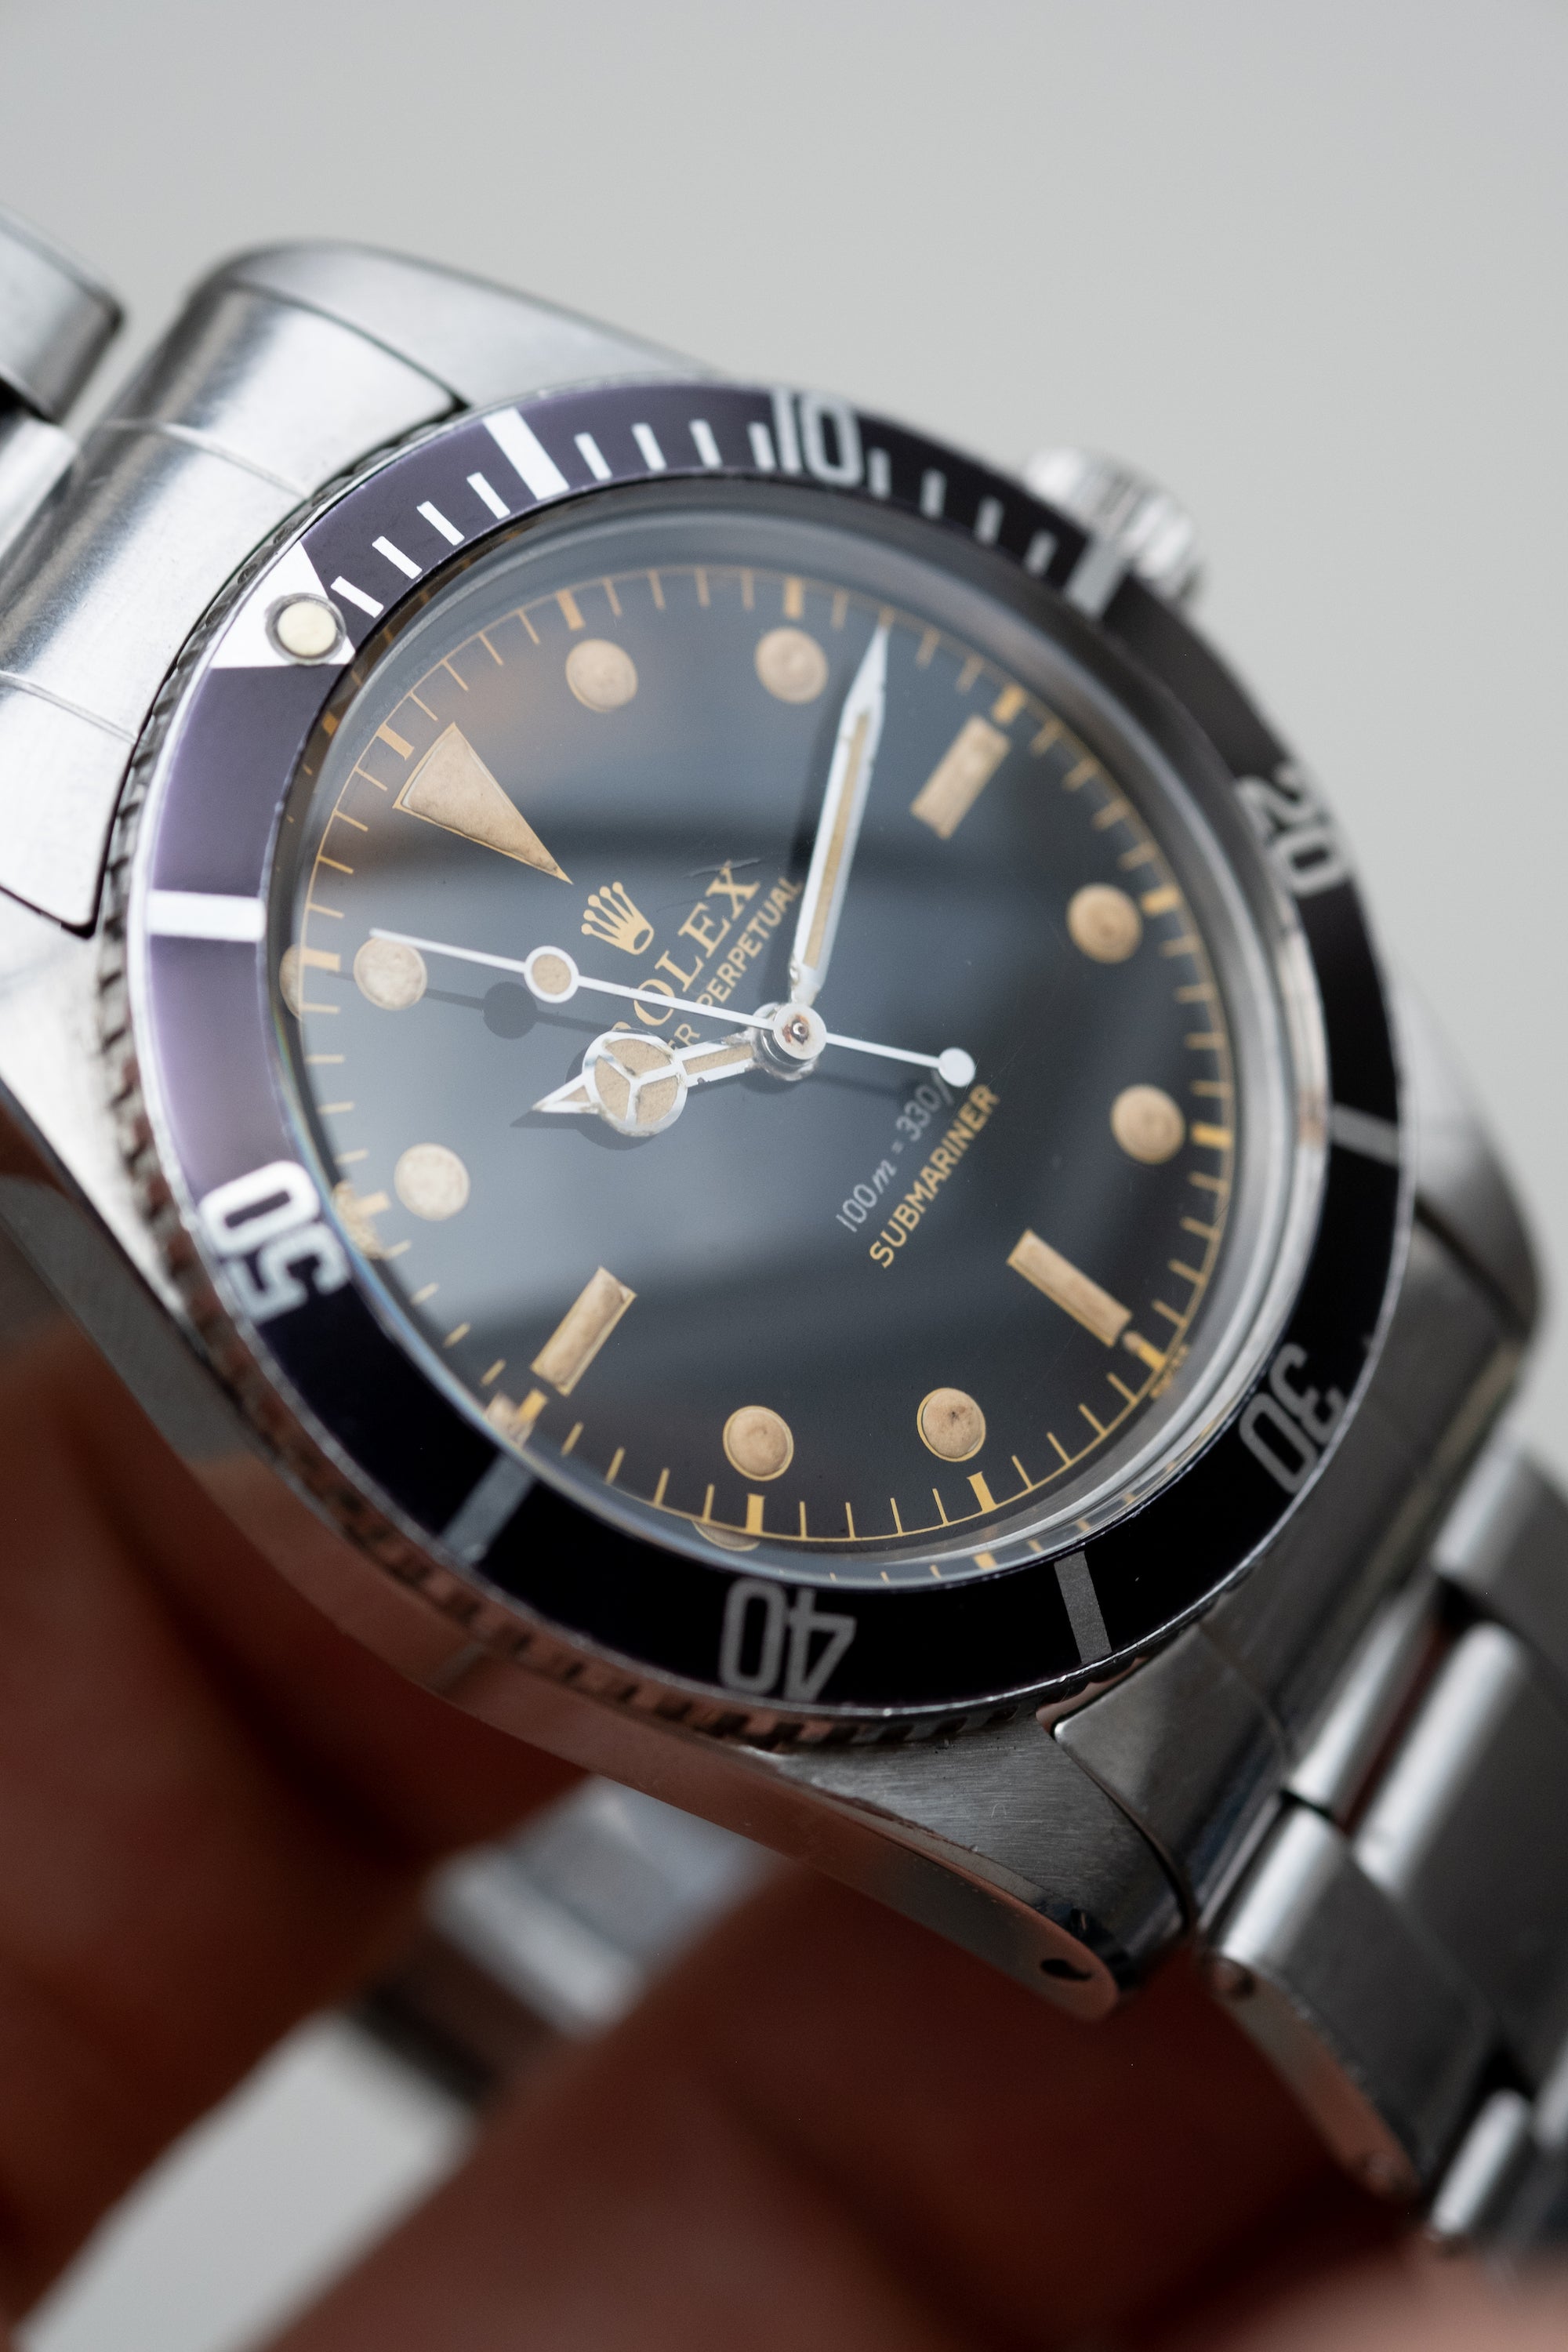 ROLEX Submariner Small Crown Ref. 5508 Gilt Exclamation Point Dial Box, Guarantee and Service Papers (1959)